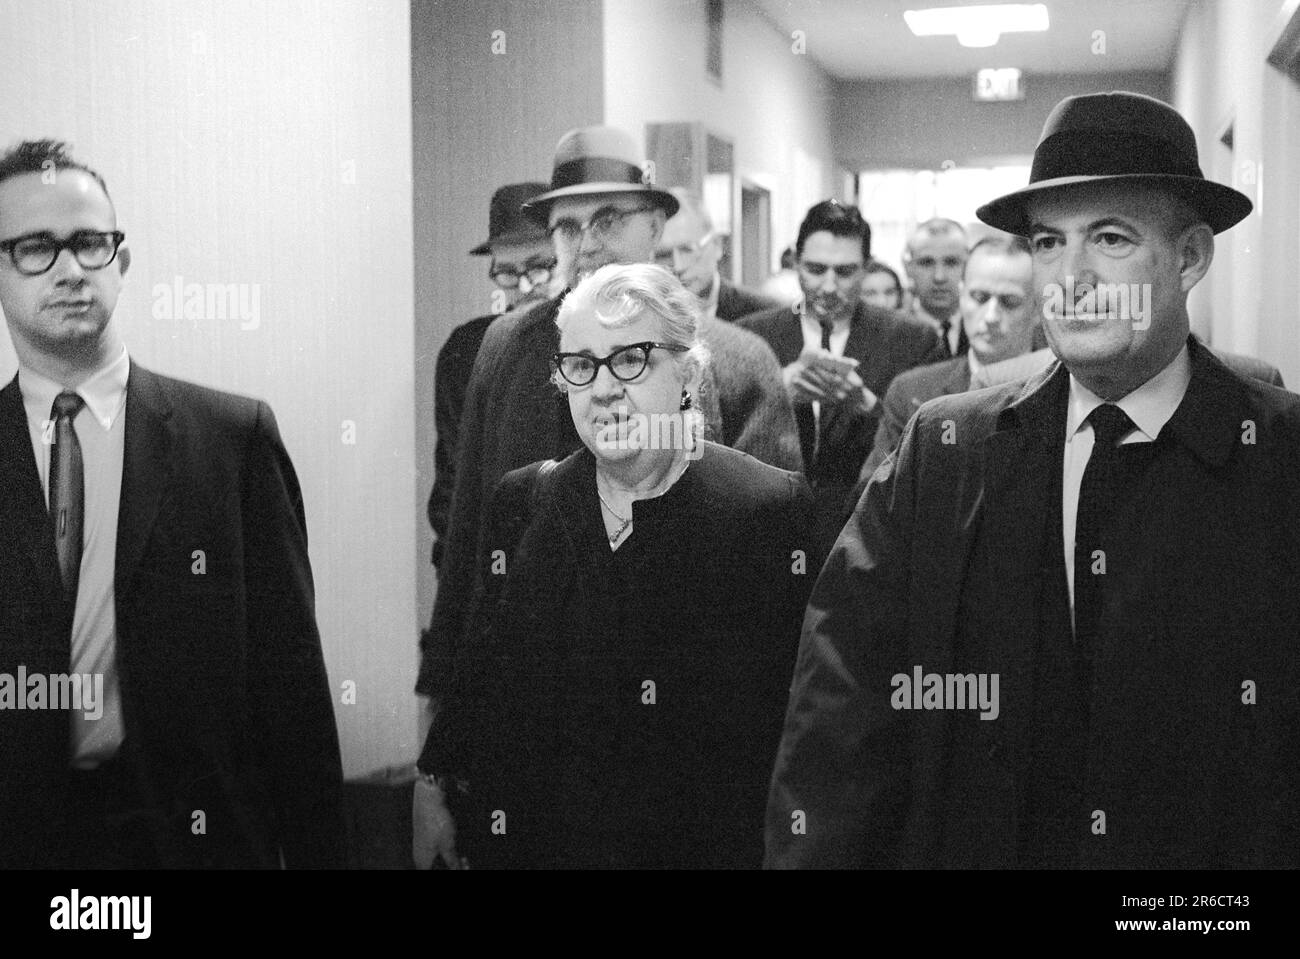 Marguerite Oswald, Lee Harvey Oswald's mother, arriving at President's Commission on the Assassination of President Kennedy or Warren Commission hearing, Washington, D.C., USA, Marion S. Trikosko, U.S. News & World Report Magazine Photograph Collection, February 11, 1964 Stock Photo